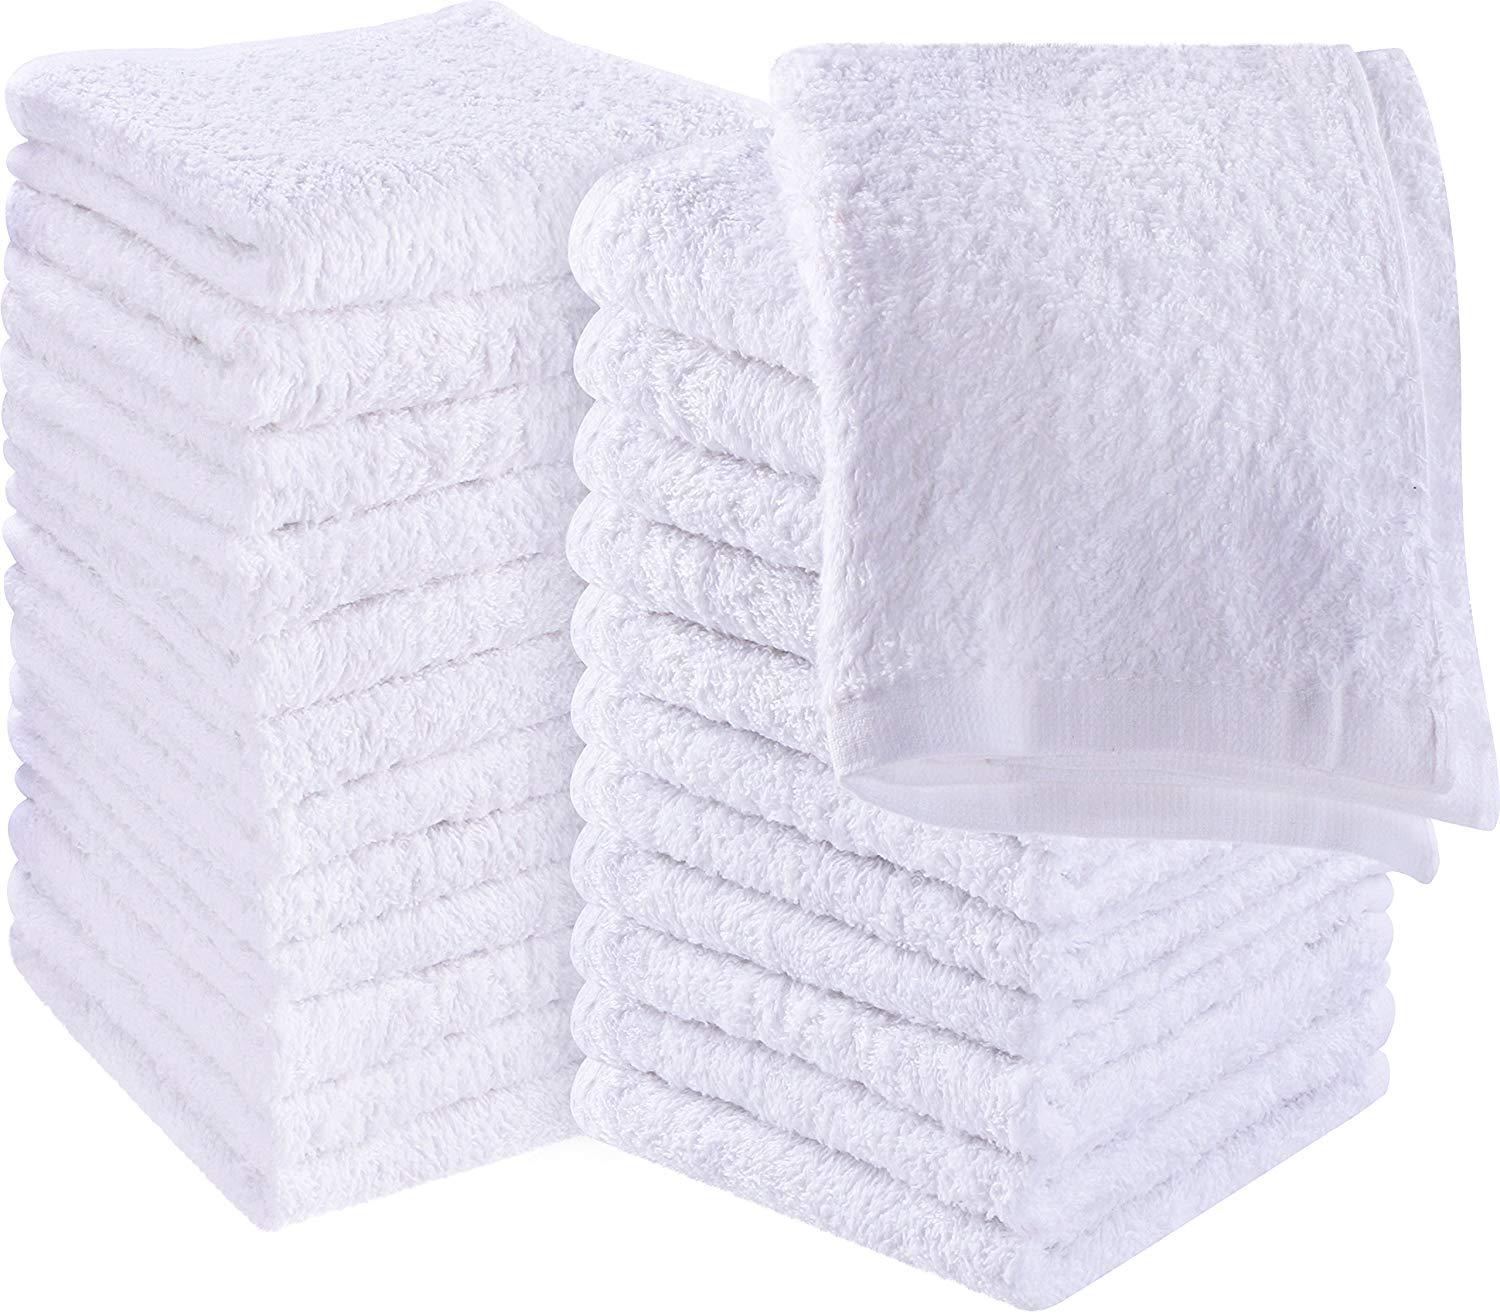 Utopia Towels Cotton Bleach Proof Salon Towels (16x27 inches) - Bleach Safe  Gym Hand Towel (12 Pack, Ivory)